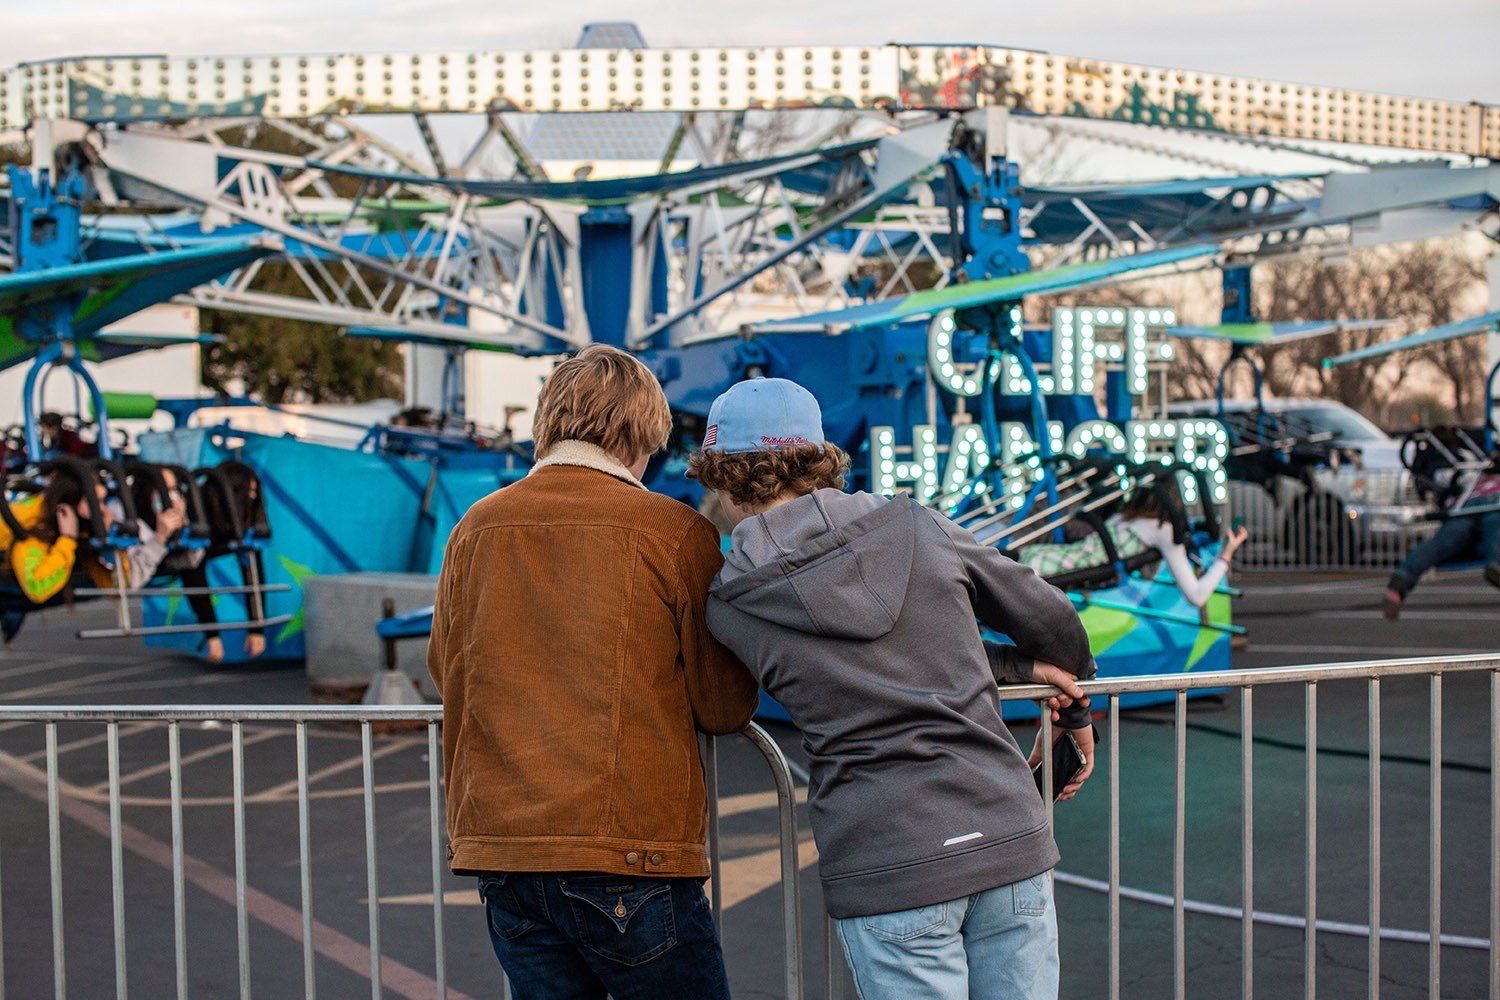 People enjoy a carnival ride at the San Antonio Stock Show and Rodeo carnival on Friday, Feb. 18, 2022. Photo by Kaylee Greenlee Beal | Heron contributor